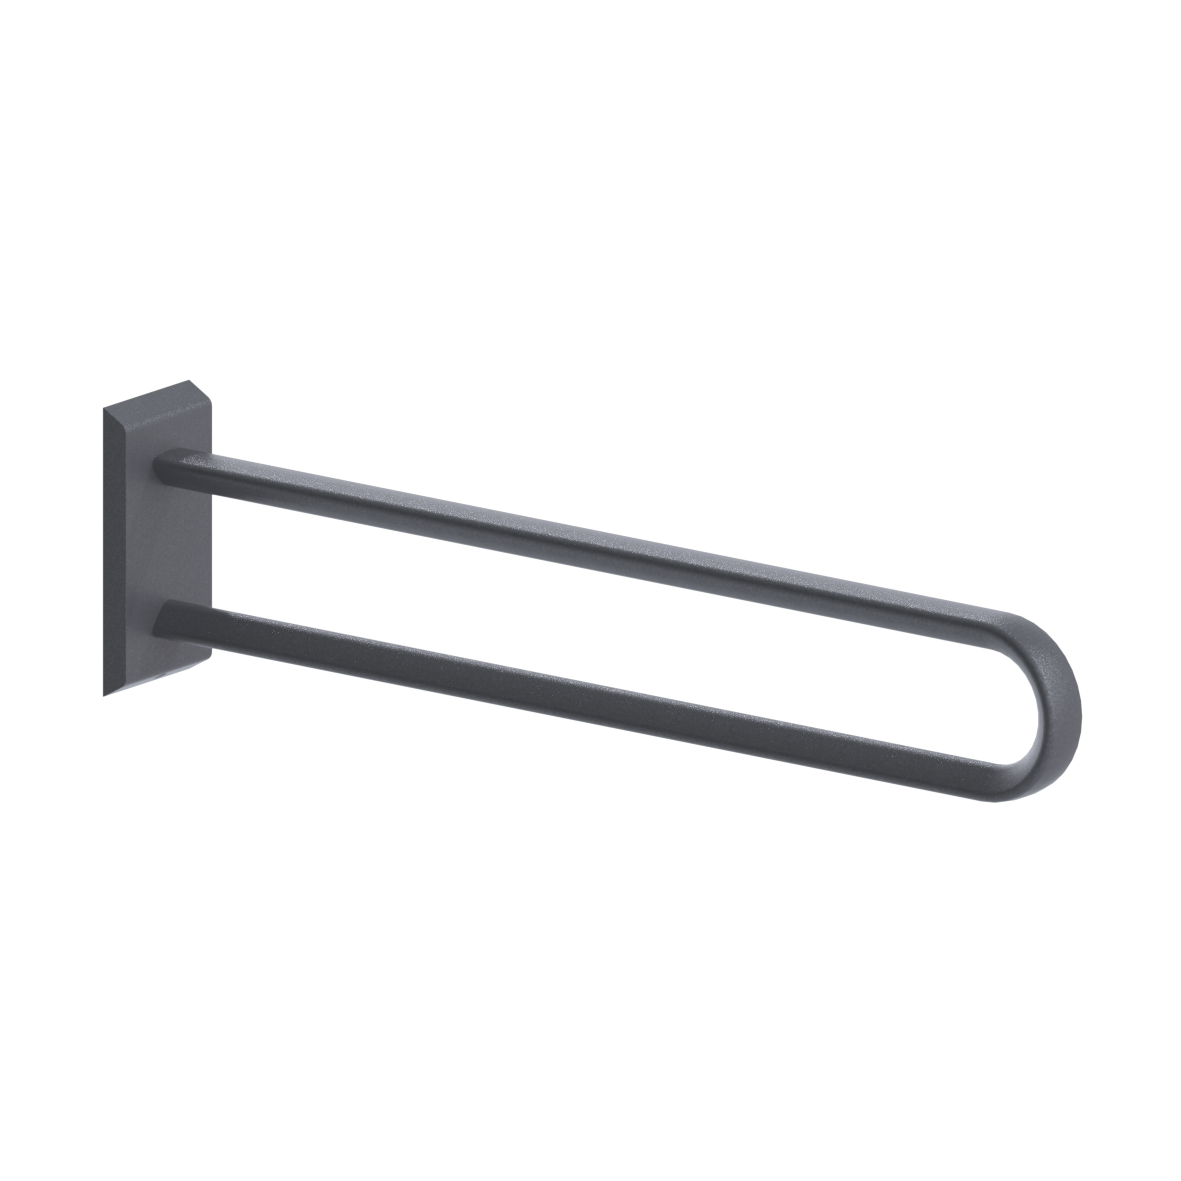 Cavere Care Wall support rail vario, with base plate, left and right, L = 850 mm, Cavere Metallic anthracite